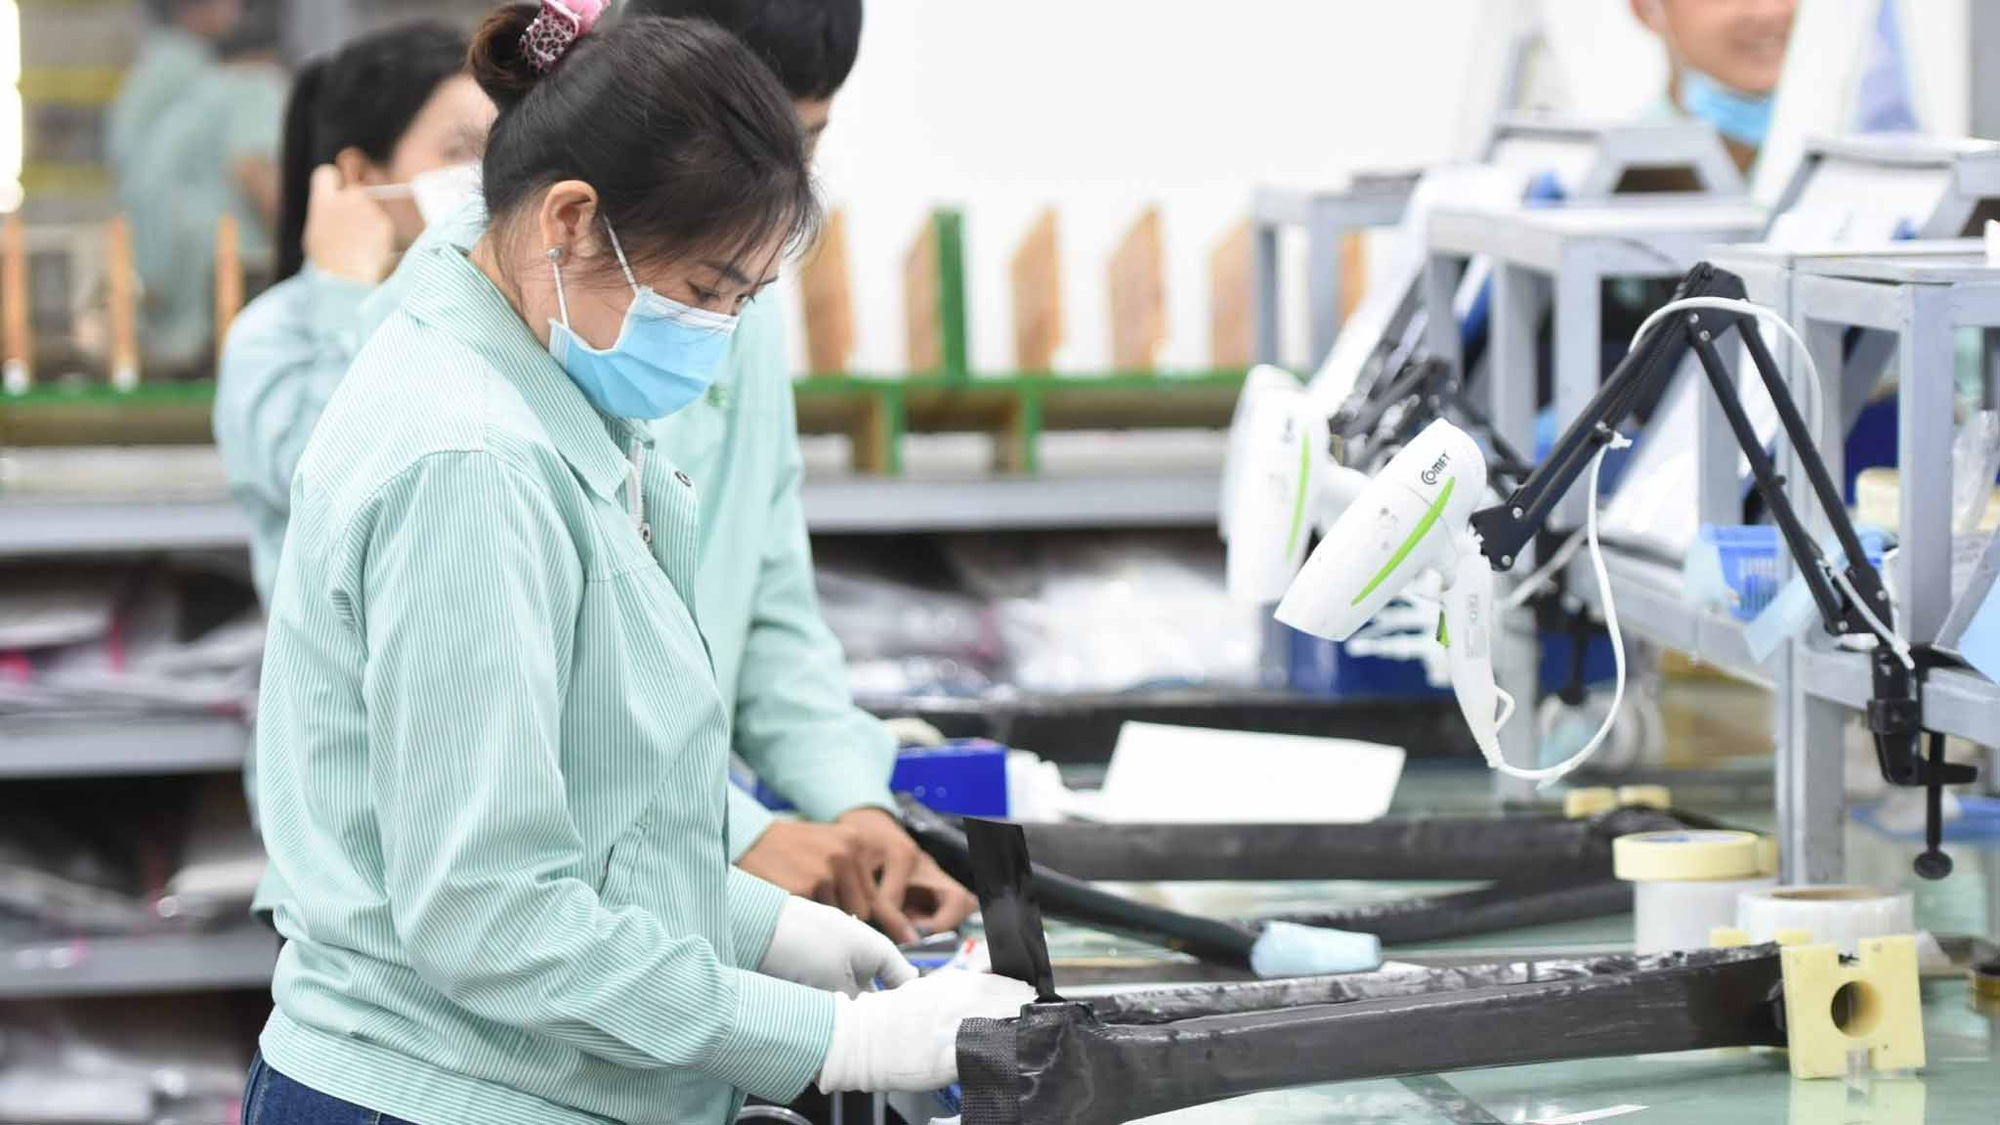 Which province has the most industrial parks in Vietnam?